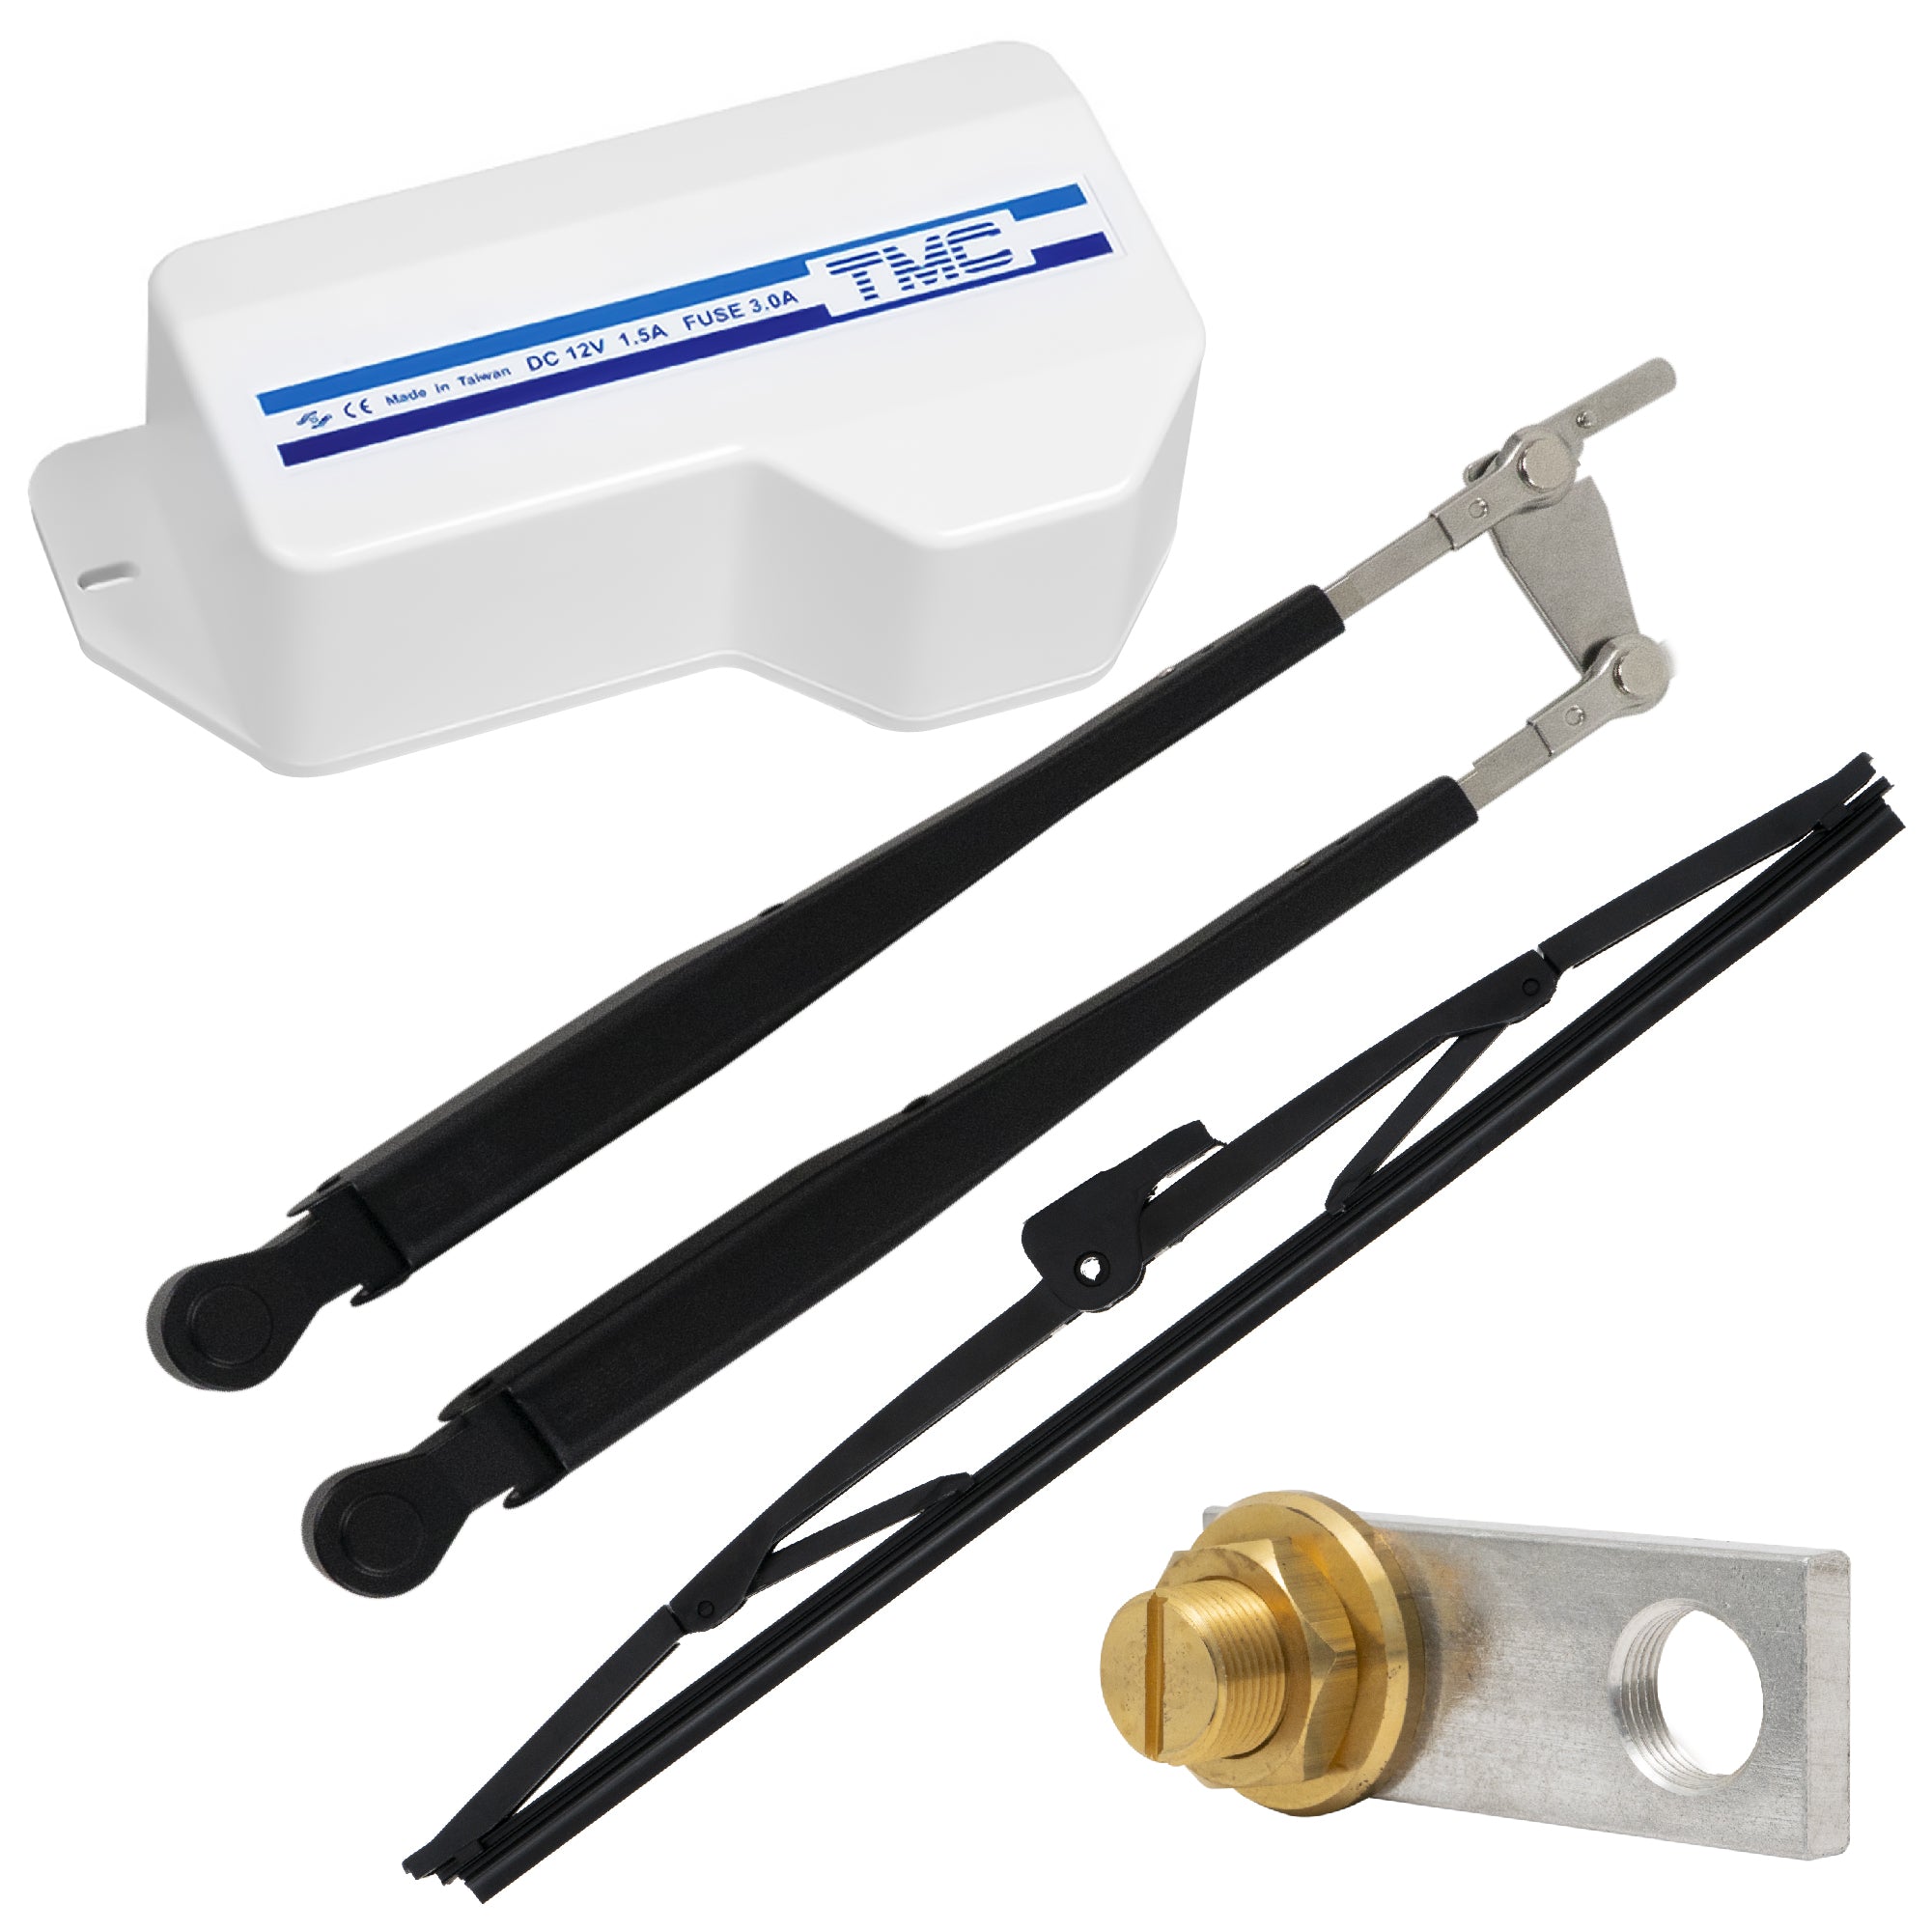 TMC Complete Windshield System Kit  - FO746-C5